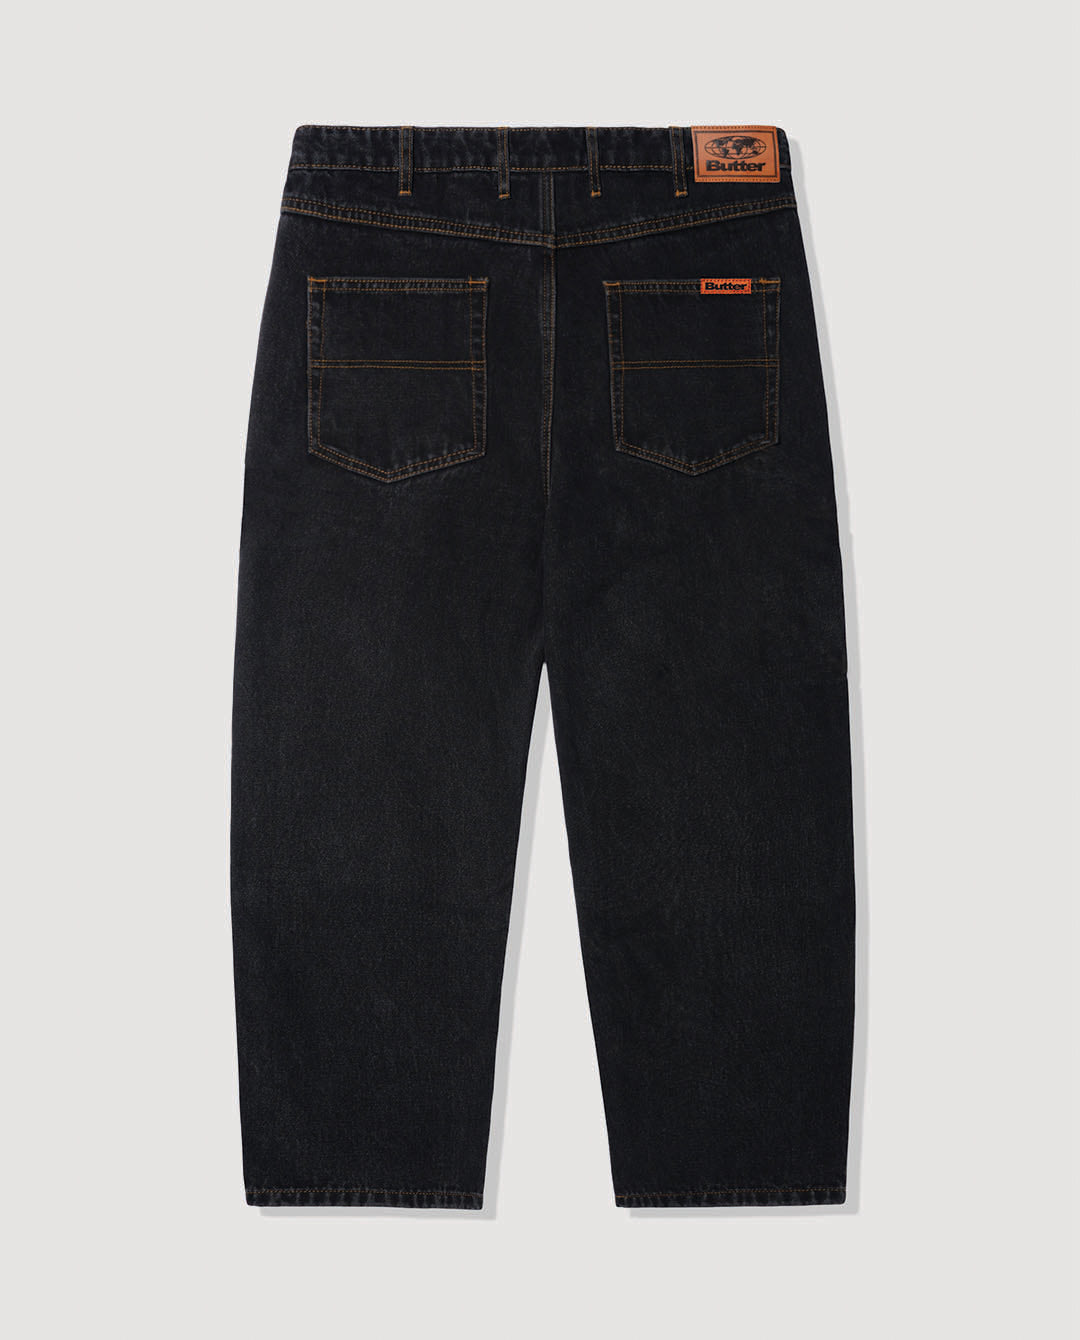 Butter Goods - Baggy Denim Jeans - Washed BlackButter Goods - Baggy Denim Jeans - Washed Black